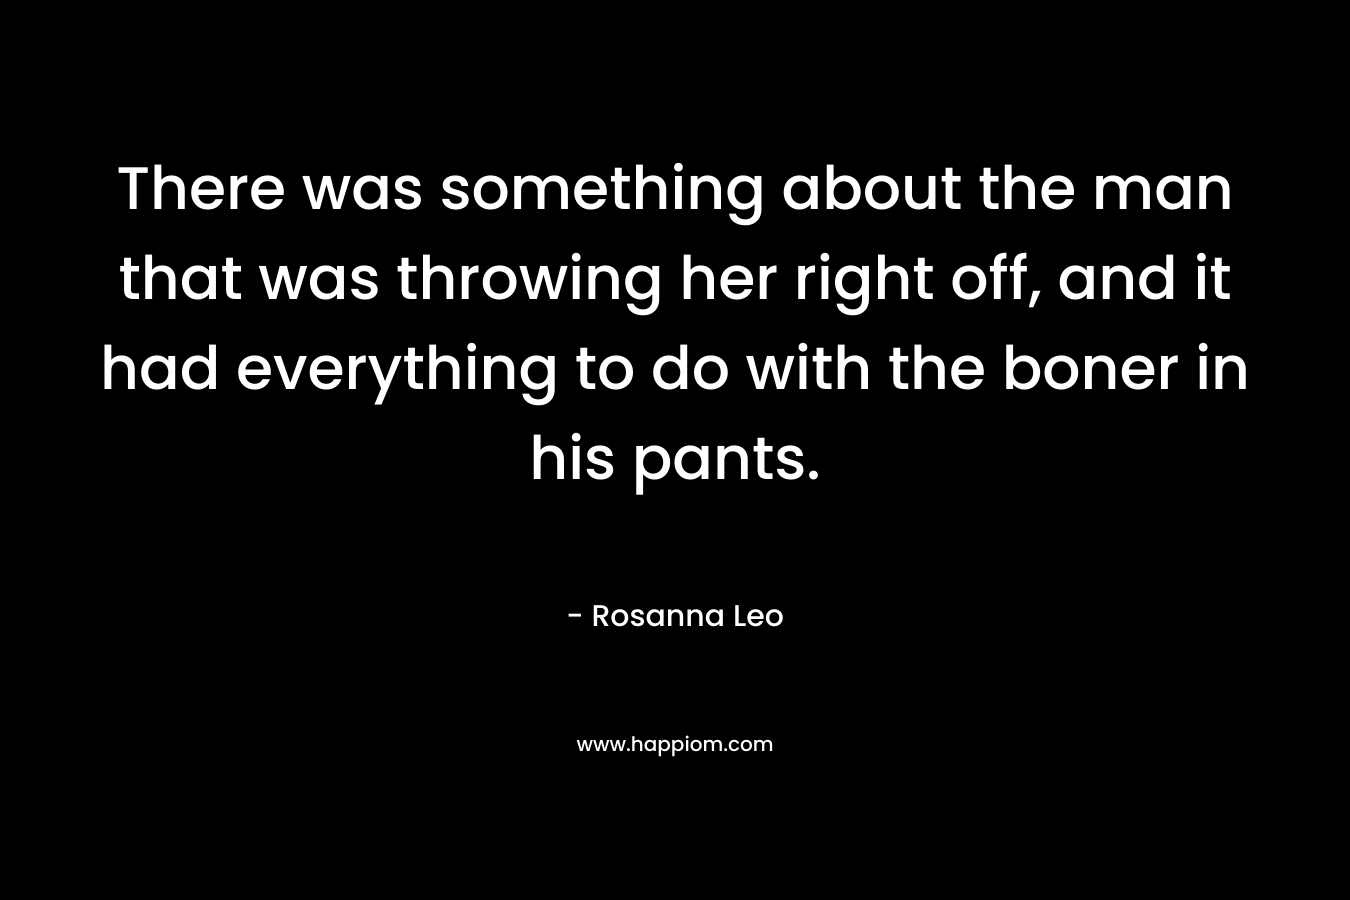 There was something about the man that was throwing her right off, and it had everything to do with the boner in his pants. – Rosanna Leo